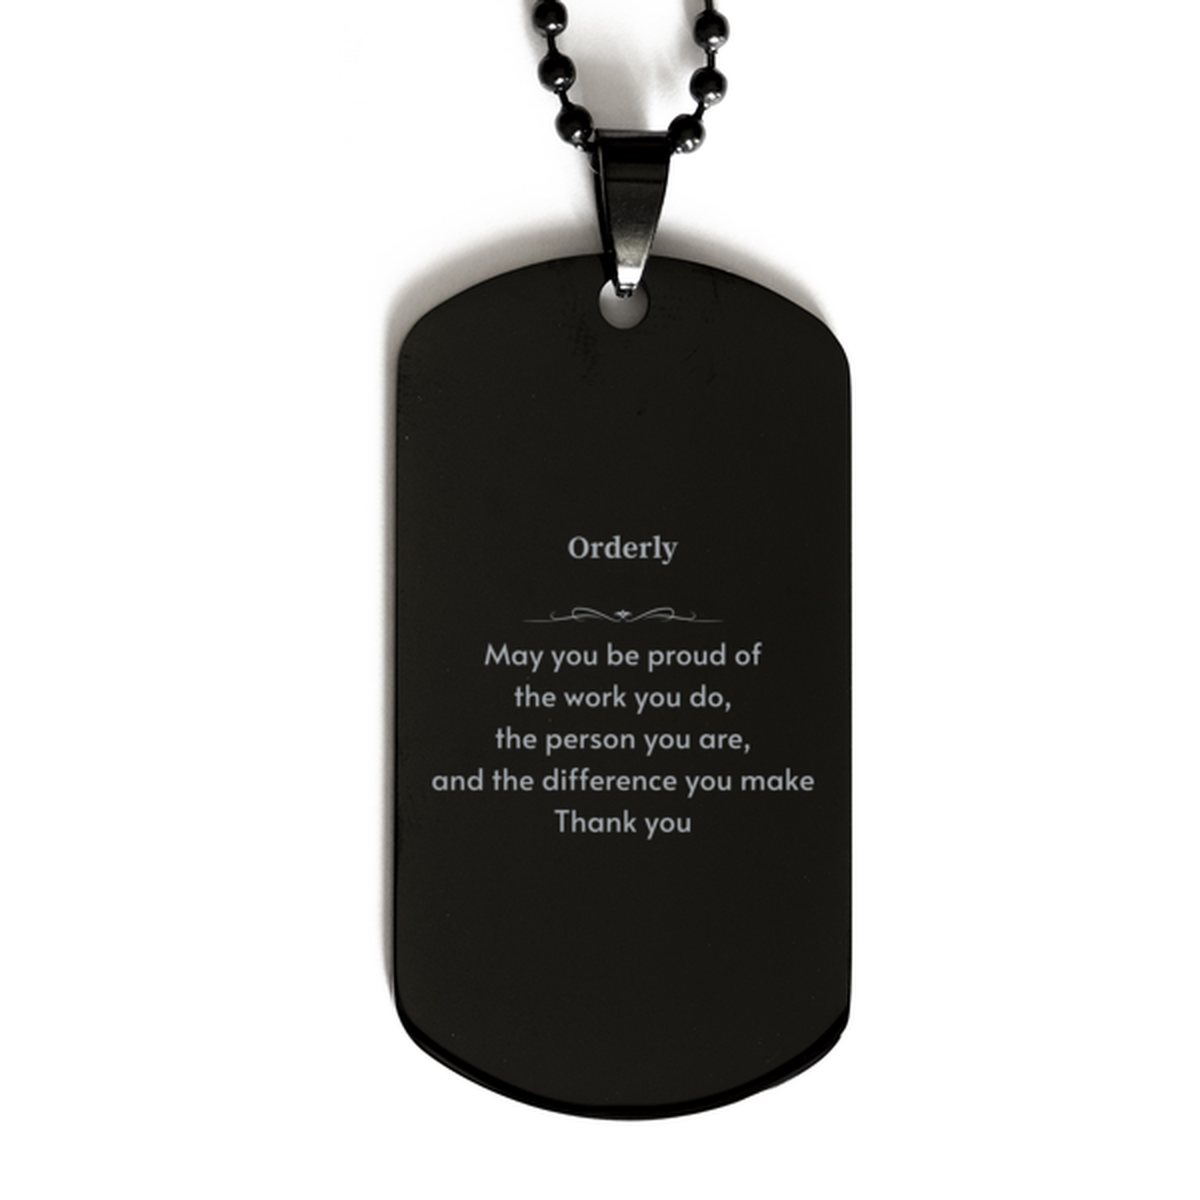 Heartwarming Black Dog Tag Retirement Coworkers Gifts for Orderly, Orderly May You be proud of the work you do, the person you are Gifts for Boss Men Women Friends